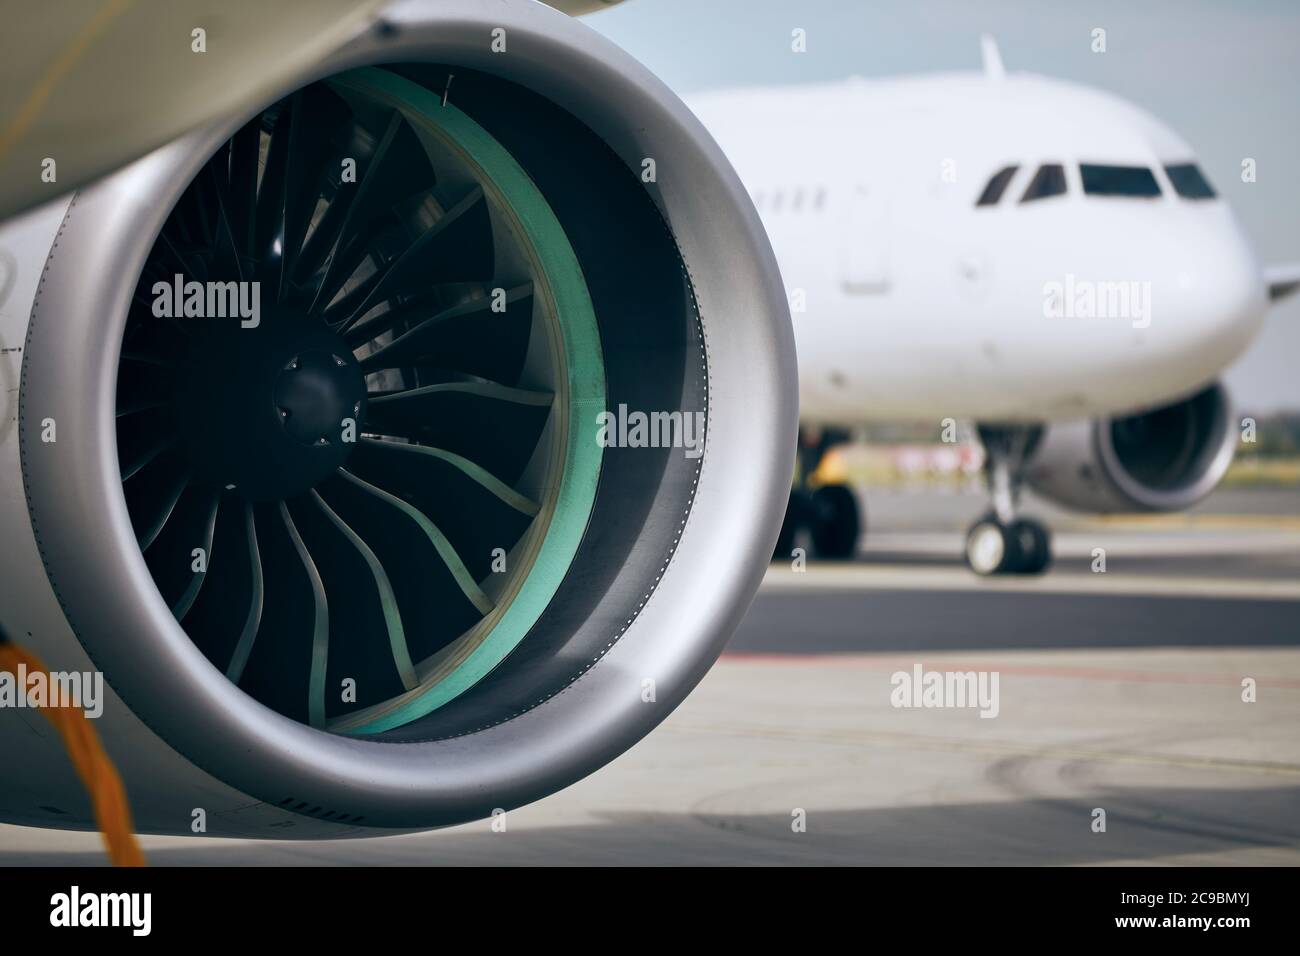 Jet engine of commercial airplane against traffic at airport. Stock Photo